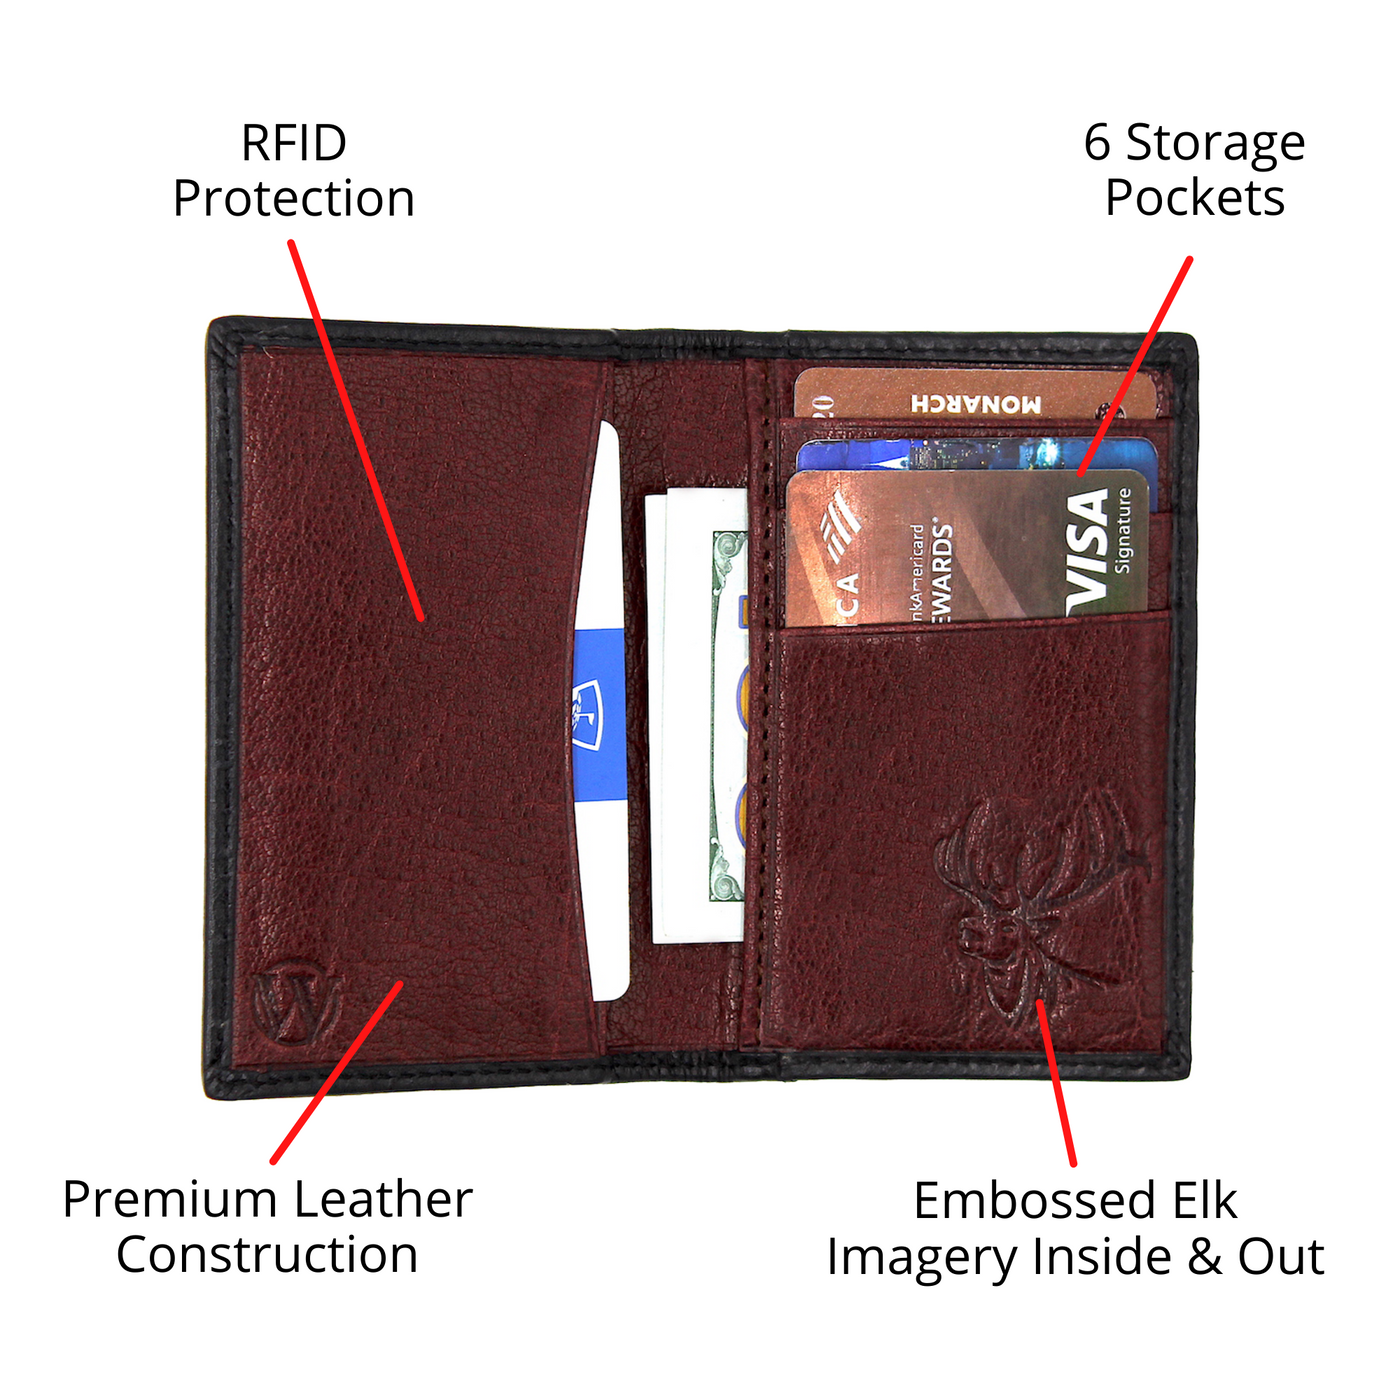 The Pursuit Front Pocket Duo-Fold Elk Wallet contains bold, hand-dyed, premier full grain leather, topped with a debossed elk found on the inner and outer corner of the wallet. Stunning piece for any collection. 4 Card Slots 2 Interior Pockets Exterior Easy Access Pocket Slim Minimalist & Modern Design Dimensions: 4.3"L x 3"H RFID Protection Color: Black | Crimson